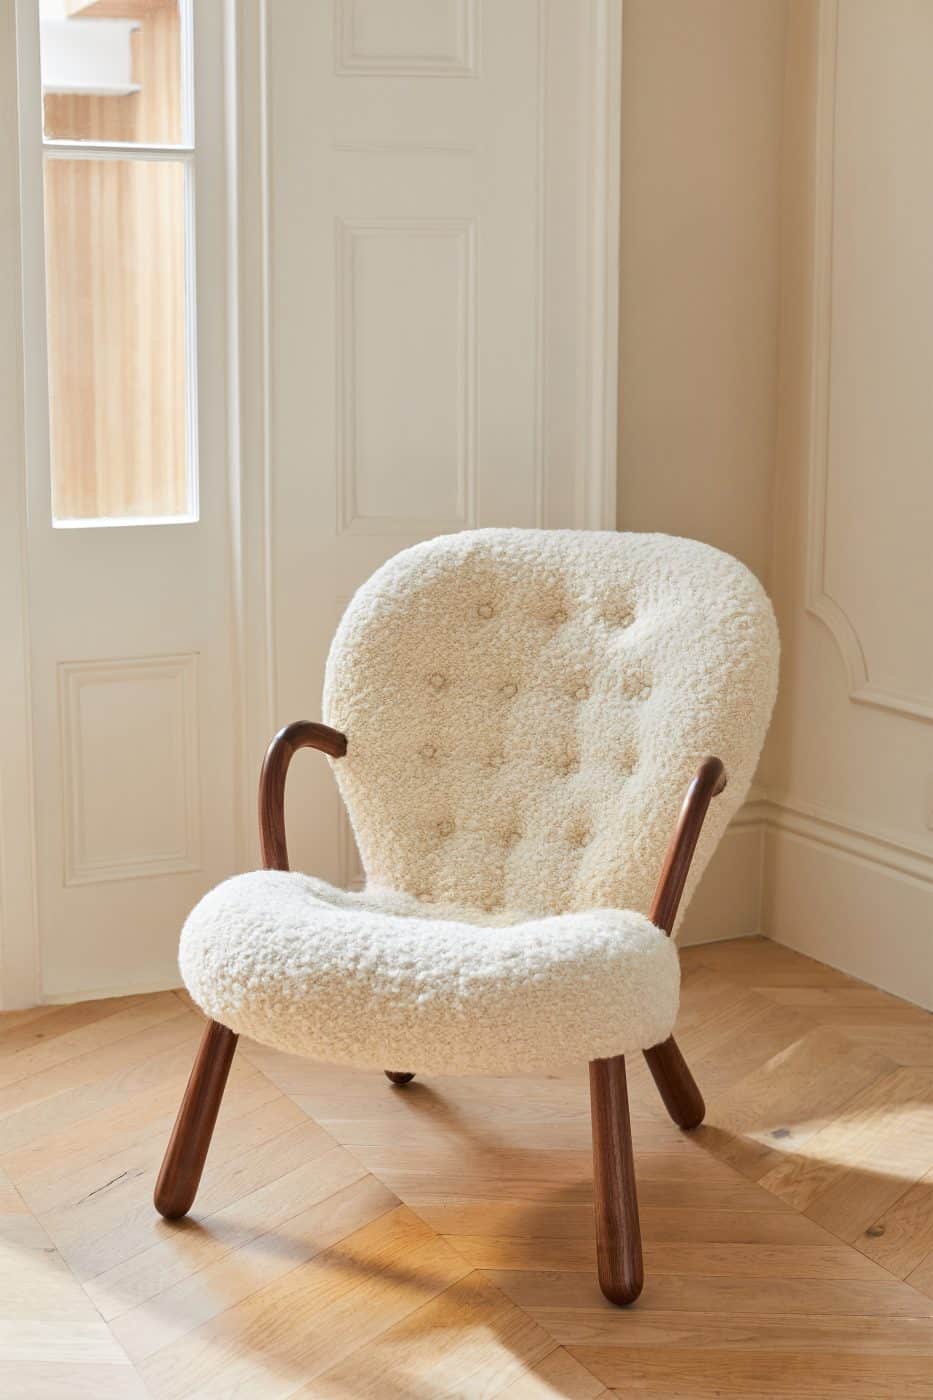 A reeditioned Clam chair with cream-colored sheepskin upholstery